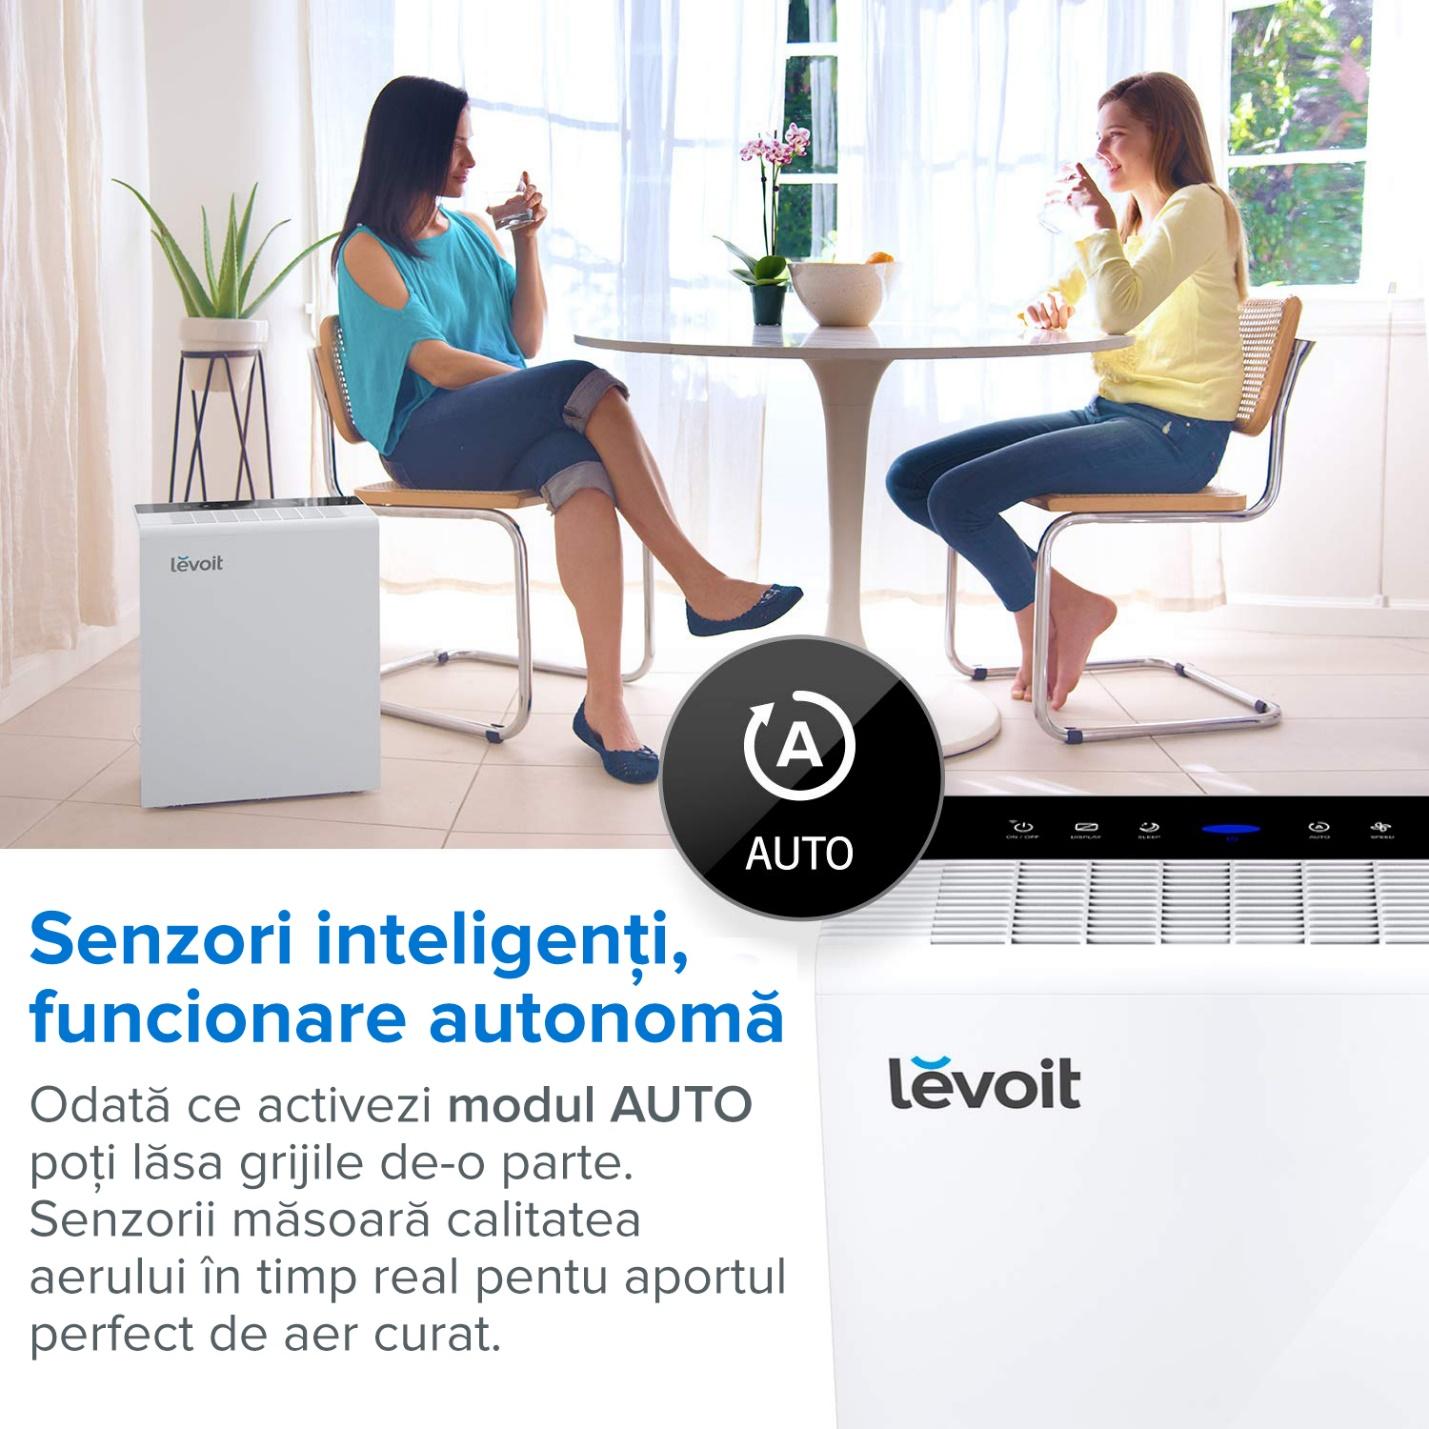 Levoit LV-PUR 131 and 131S Air Purifier